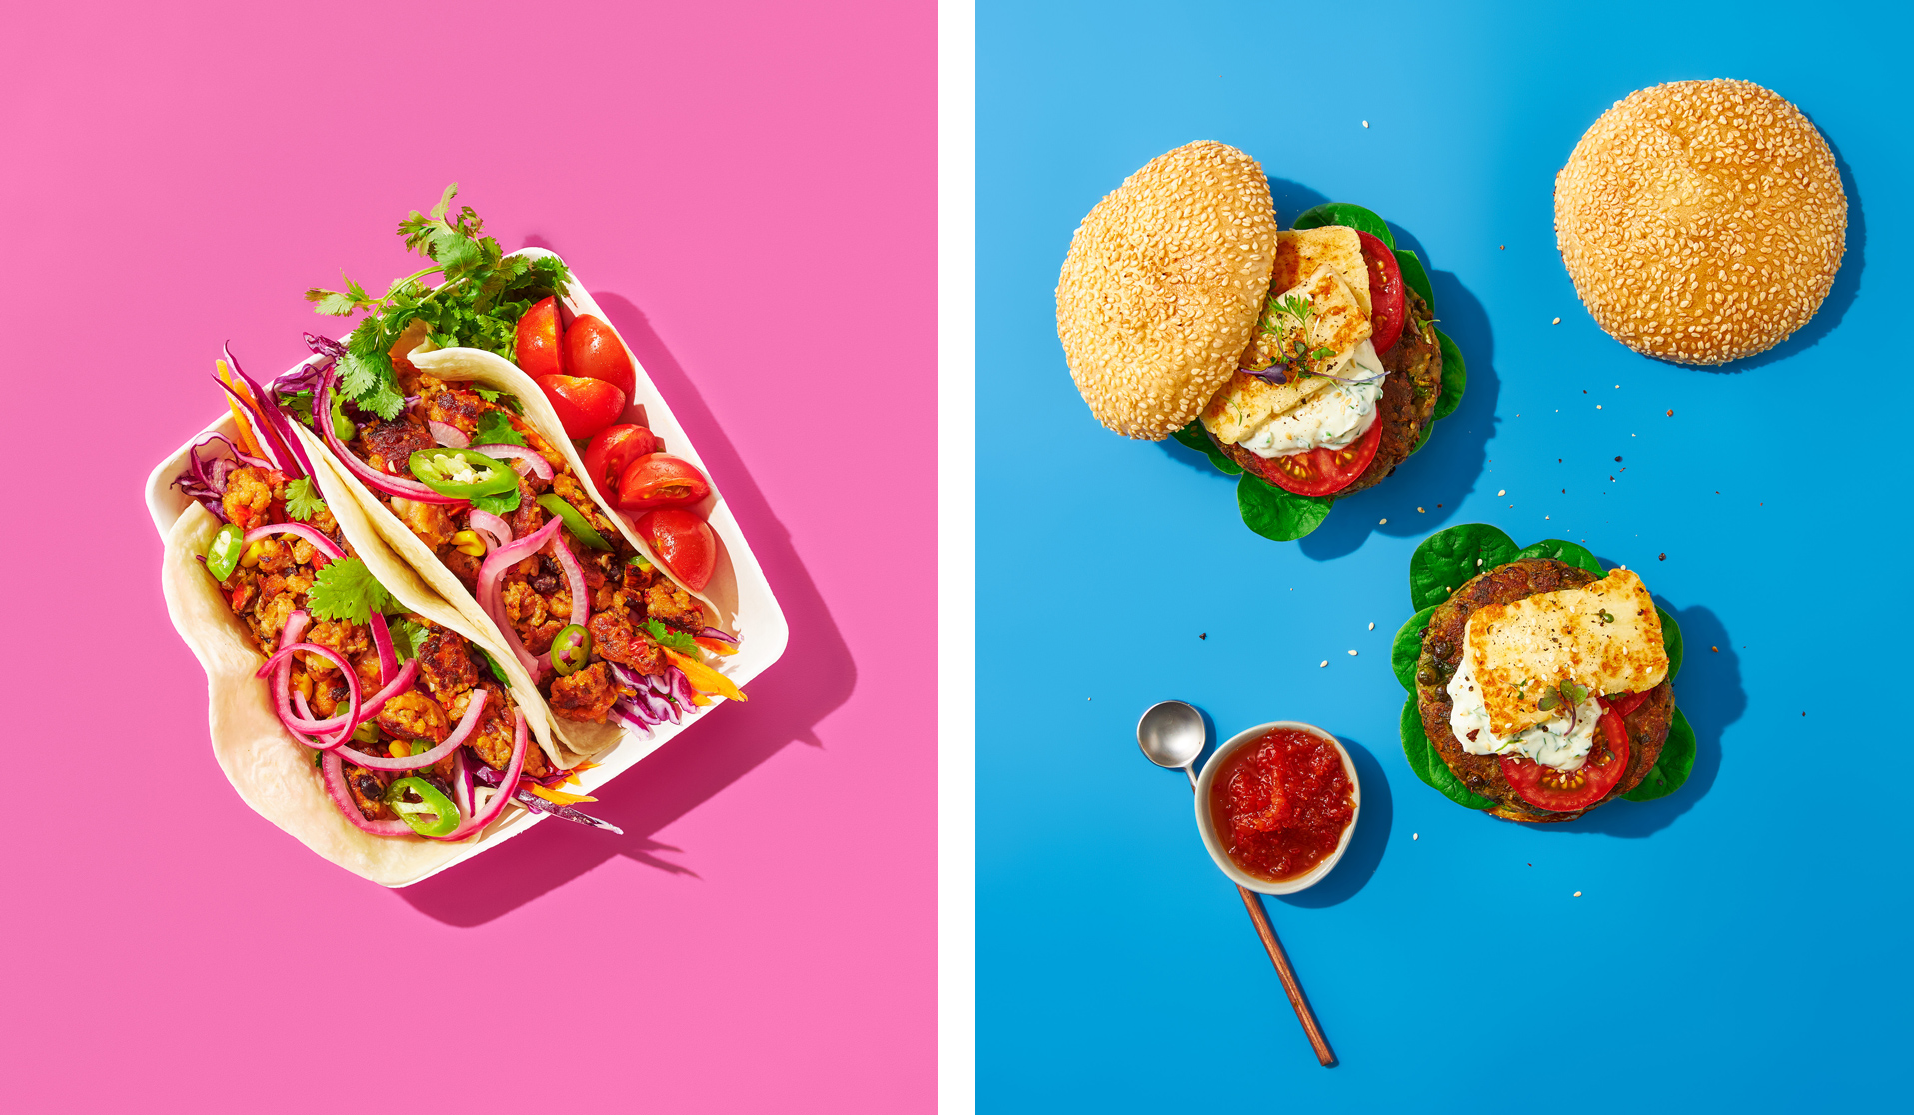 Food photography and art direction by New Zealand studio Seachange for plant-based food brand Food Nation.